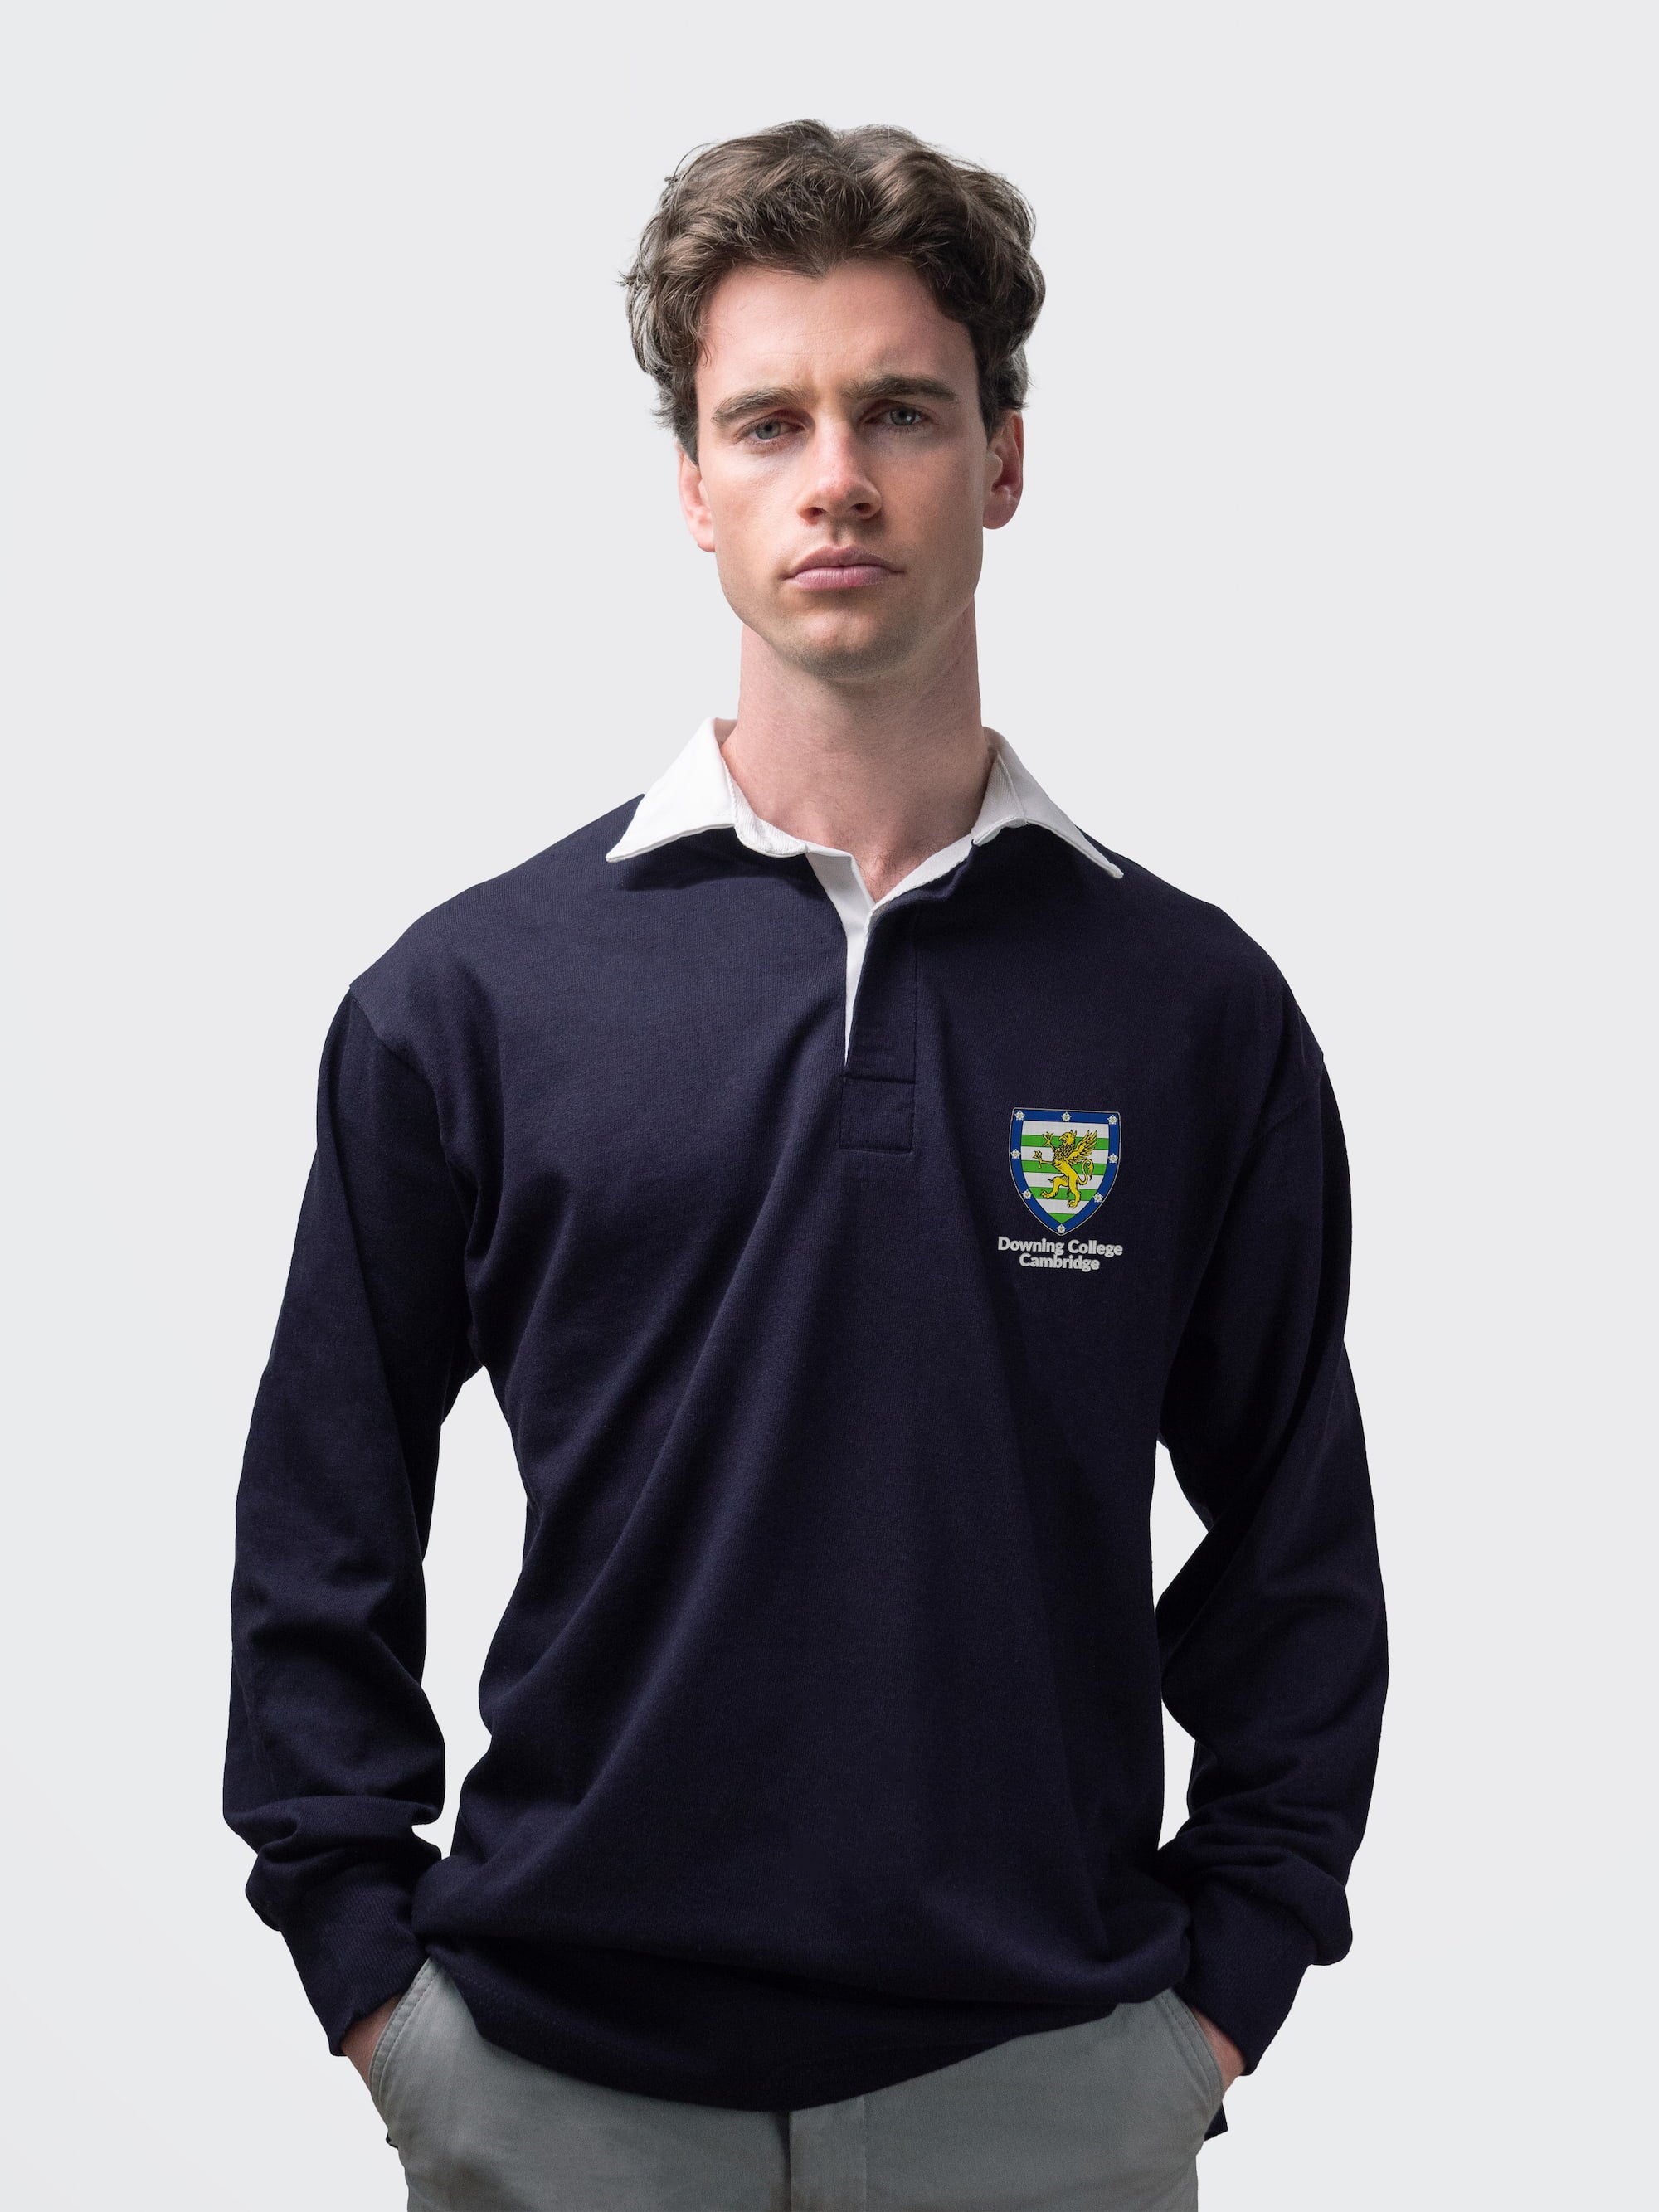 Downing student wearing an embroidered mens rugby shirt in navy